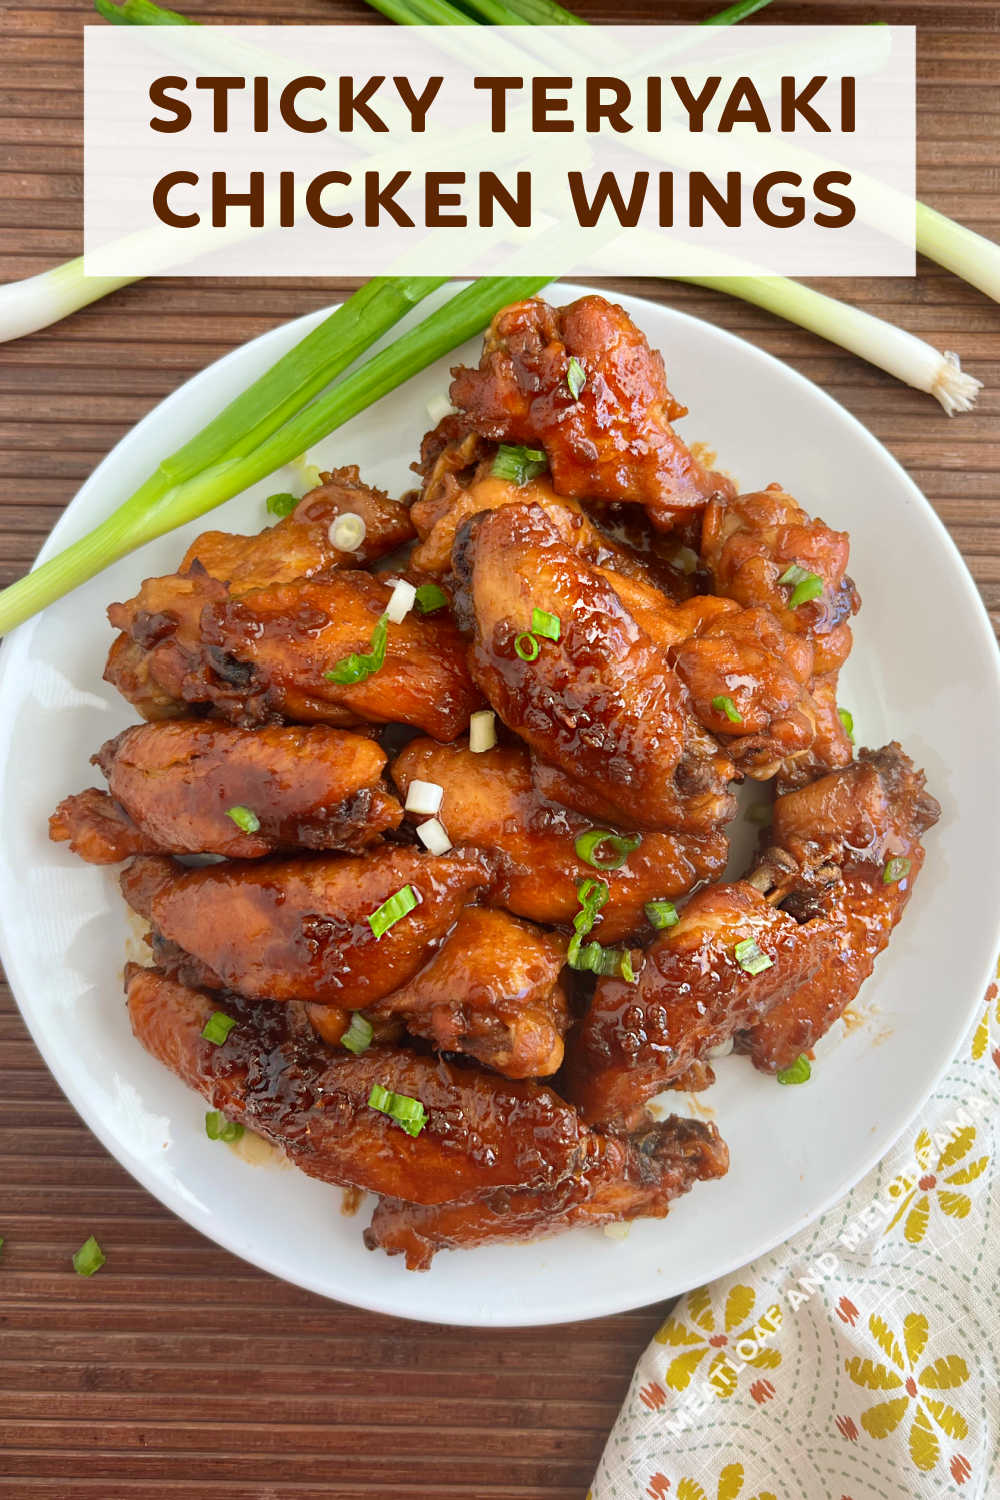 Teriyaki Chicken Wings with homemade teriyaki sauce are sticky and delicious. These teriyaki wings are the perfect game day appetizer or easy meal for busy weeknights. They're finger-licking good! via @meamel